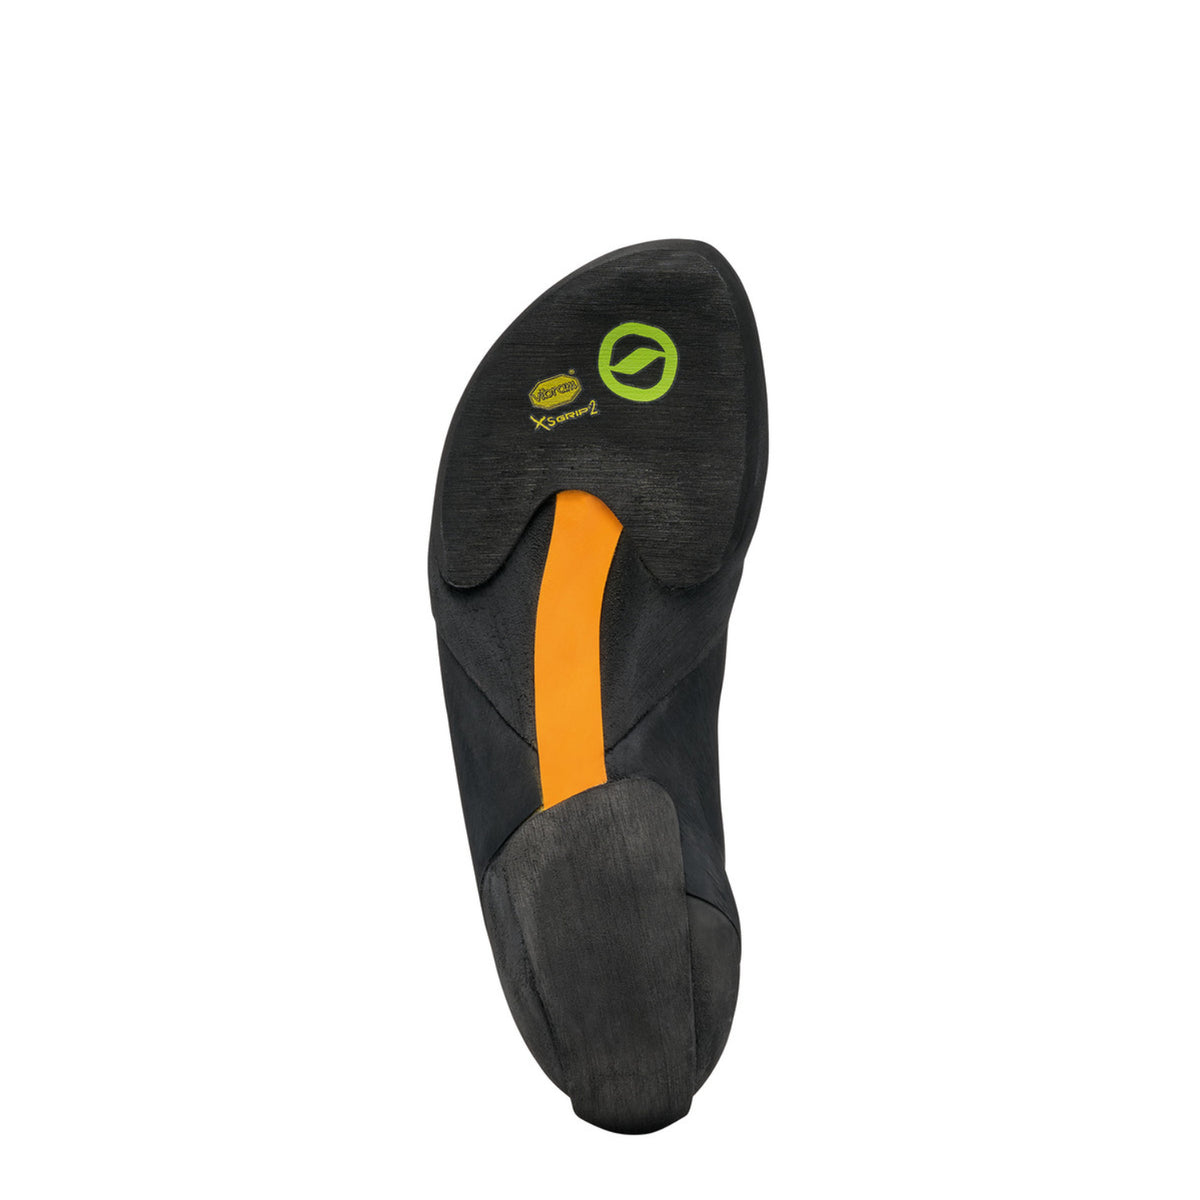 Scarpa Drago climbing shoe, in black and yellow colours showing sole unit